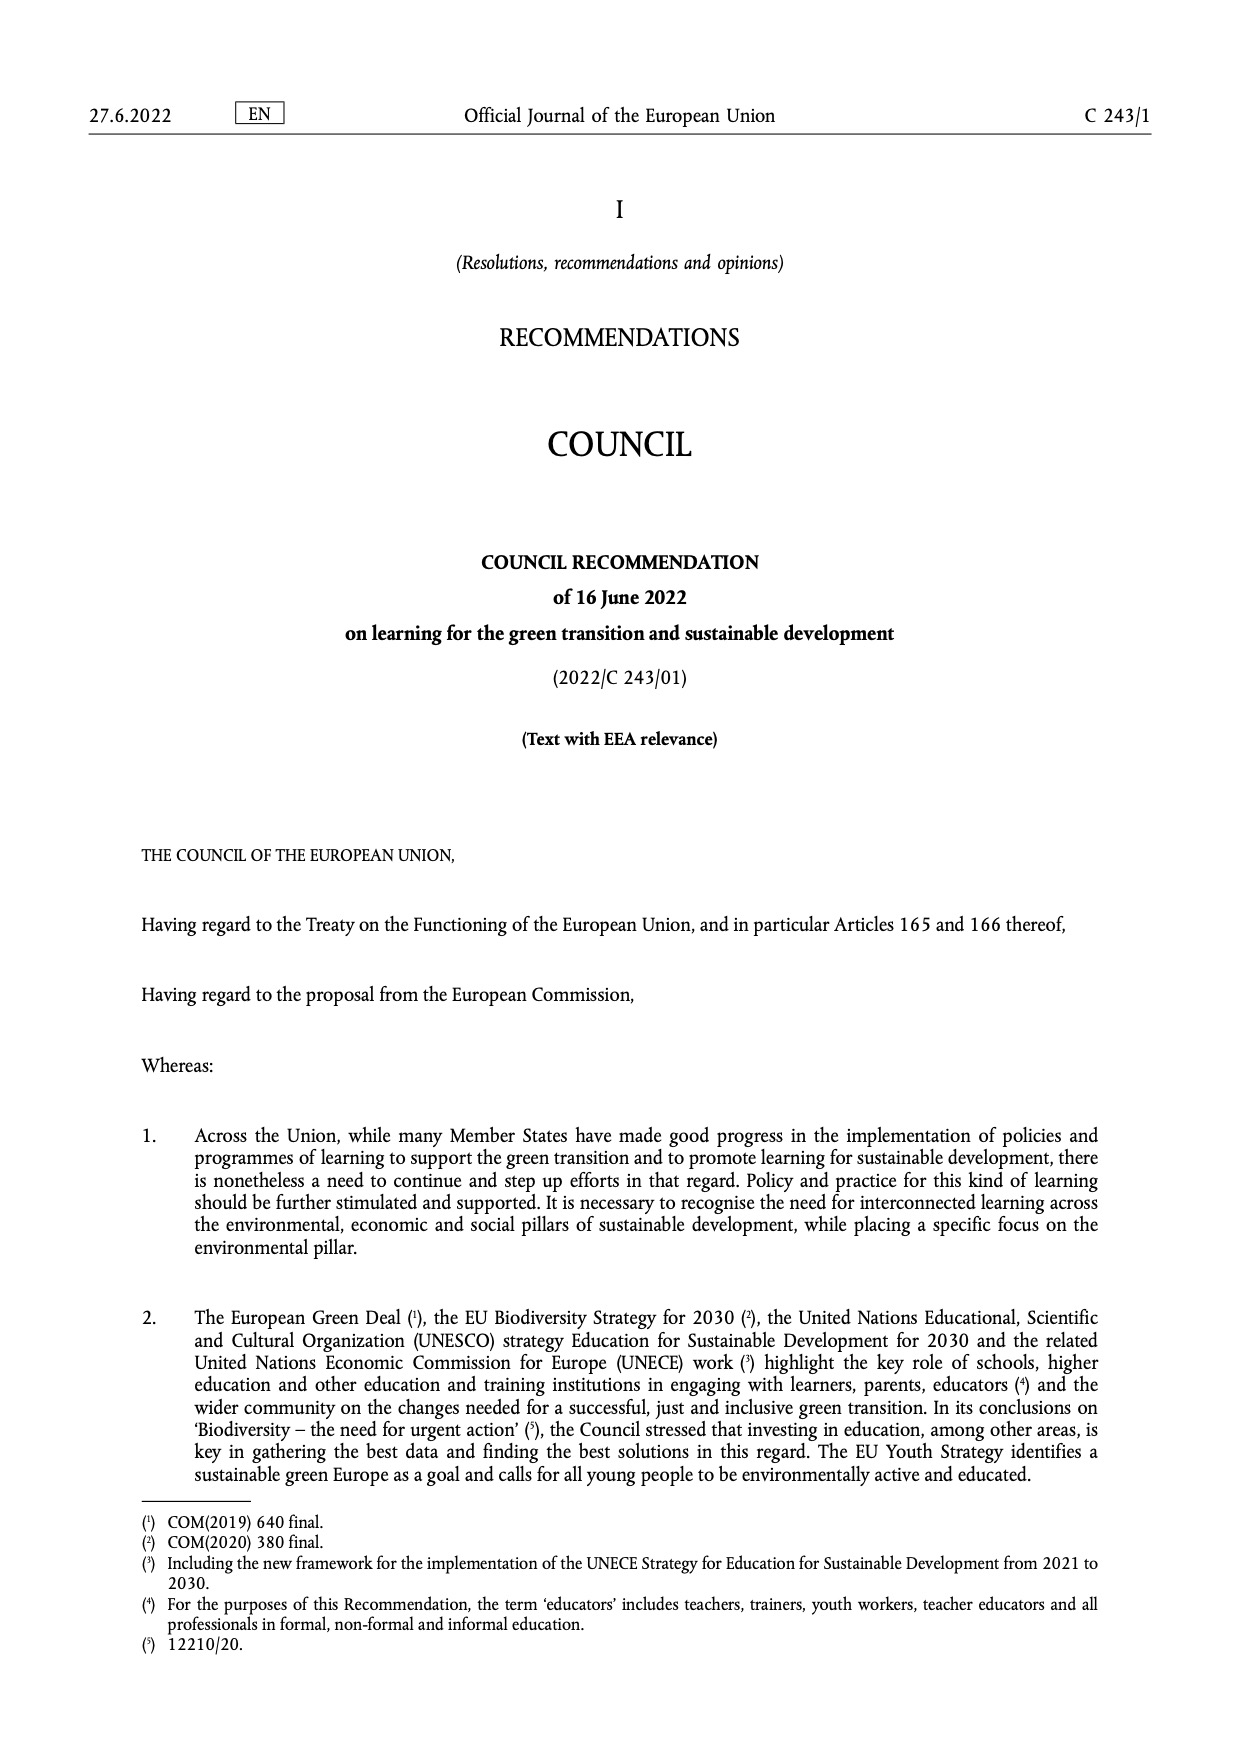 Council recommendation on learning for the green transition and sustainable development 1